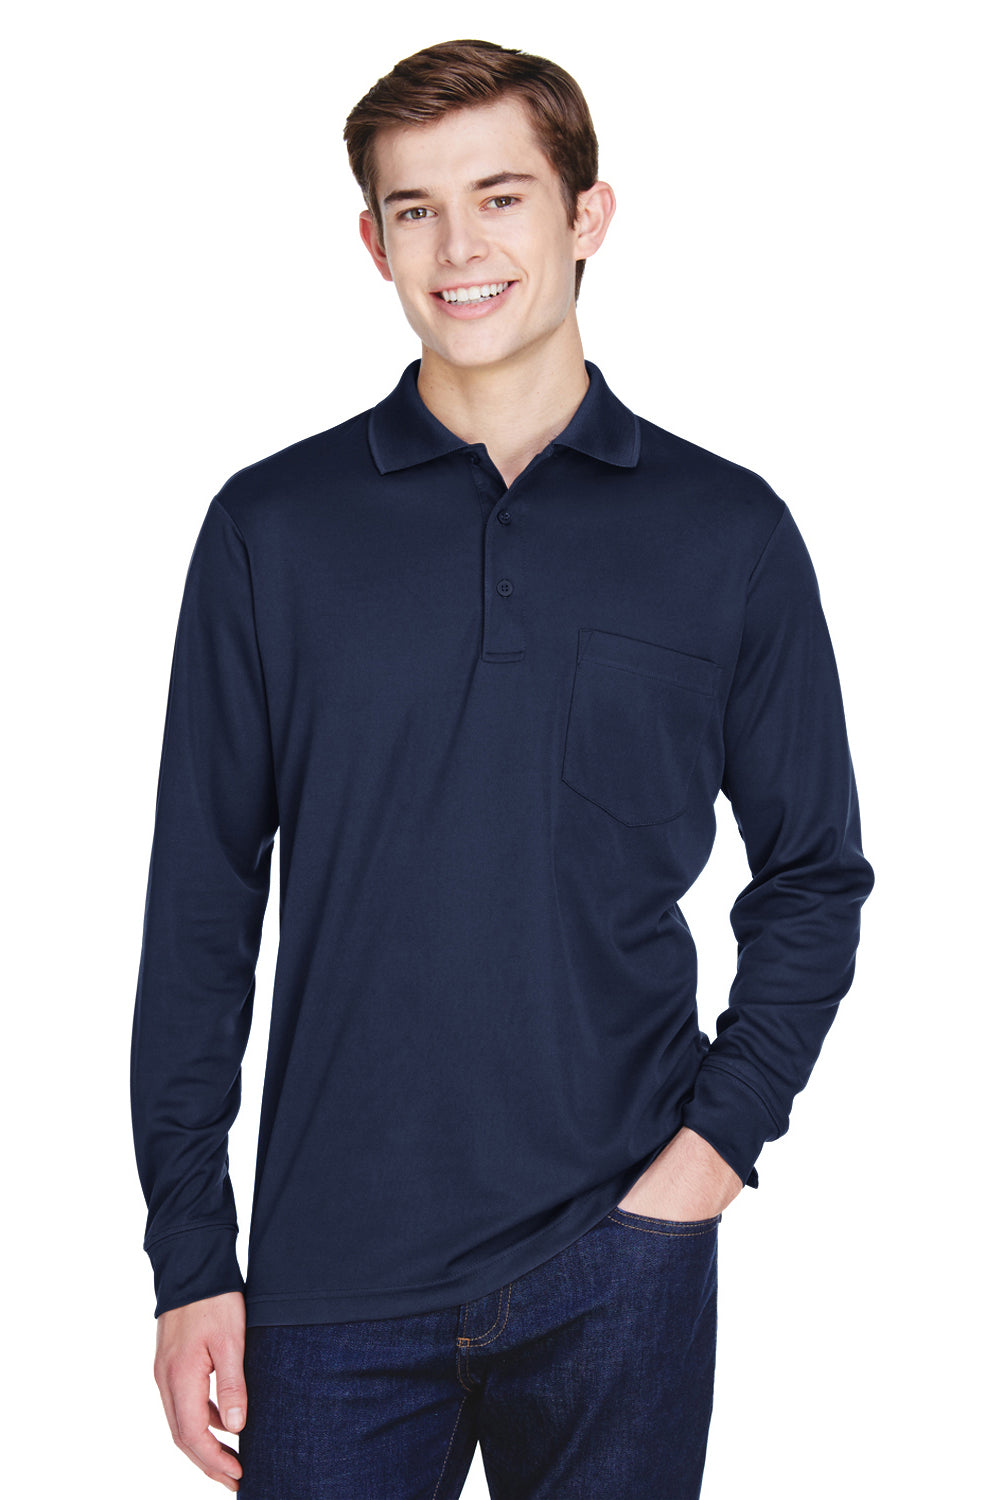 Core 365 88192P Mens Pinnacle Performance Moisture Wicking Long Sleeve Polo Shirt w/ Pocket Navy Blue Front